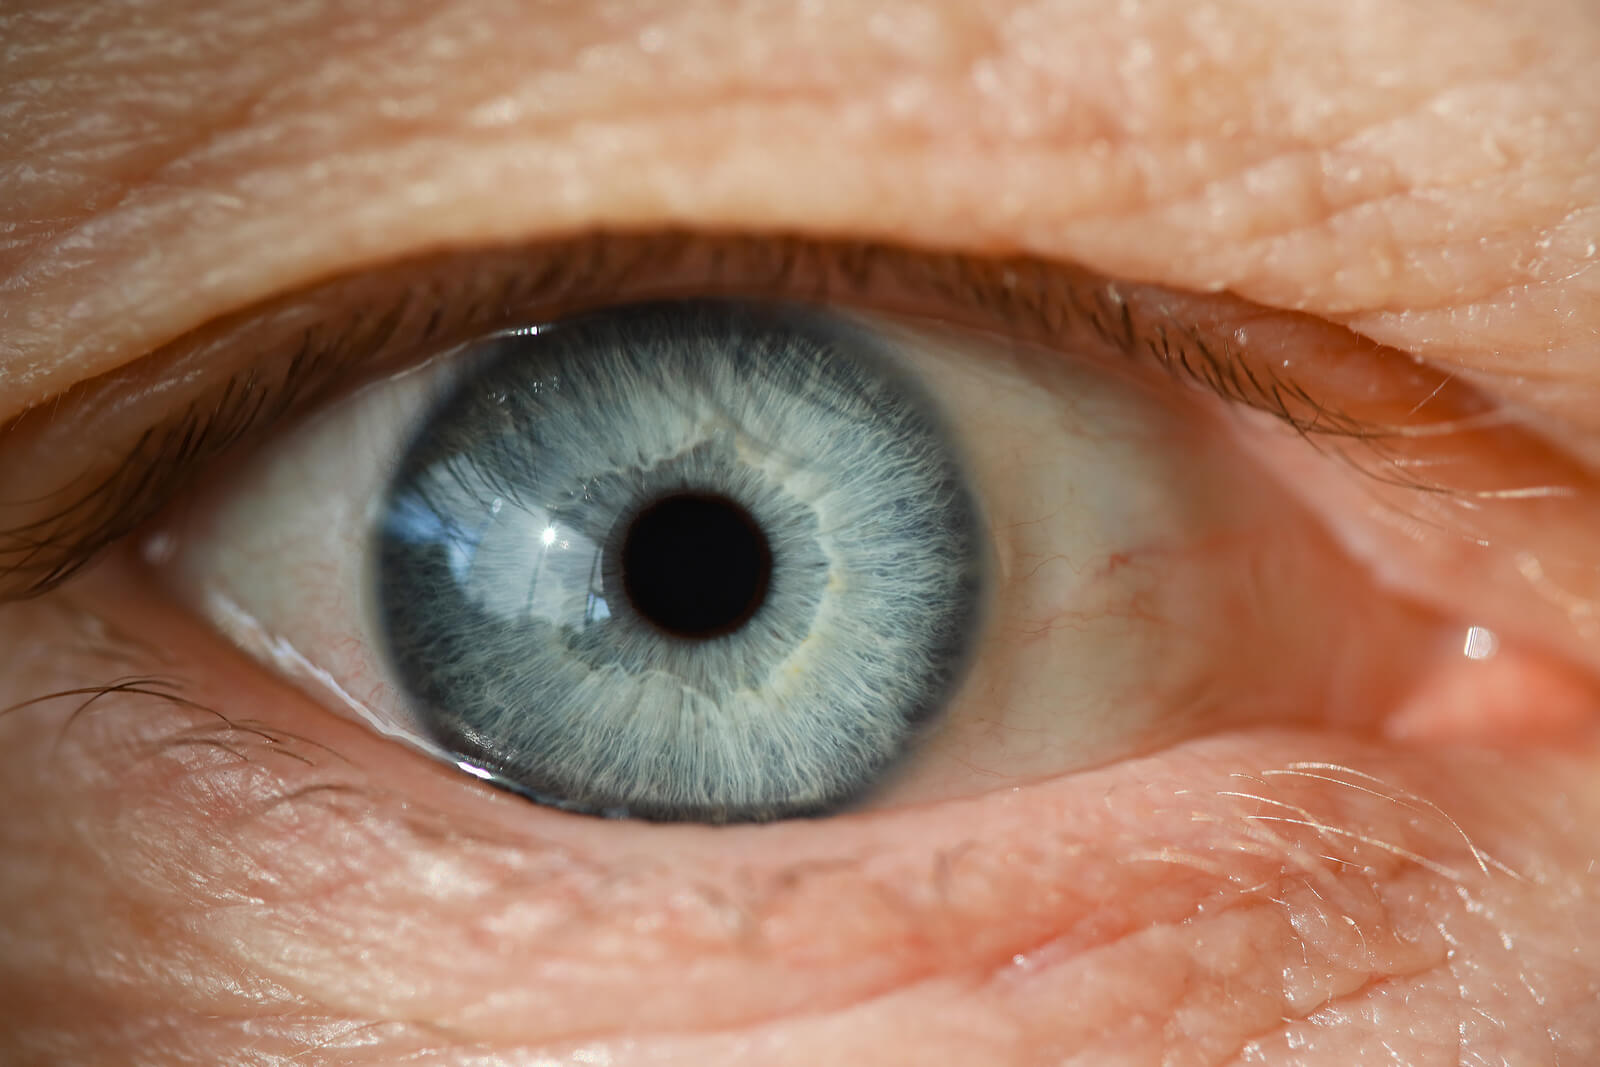 Cataracts are a common eye problem